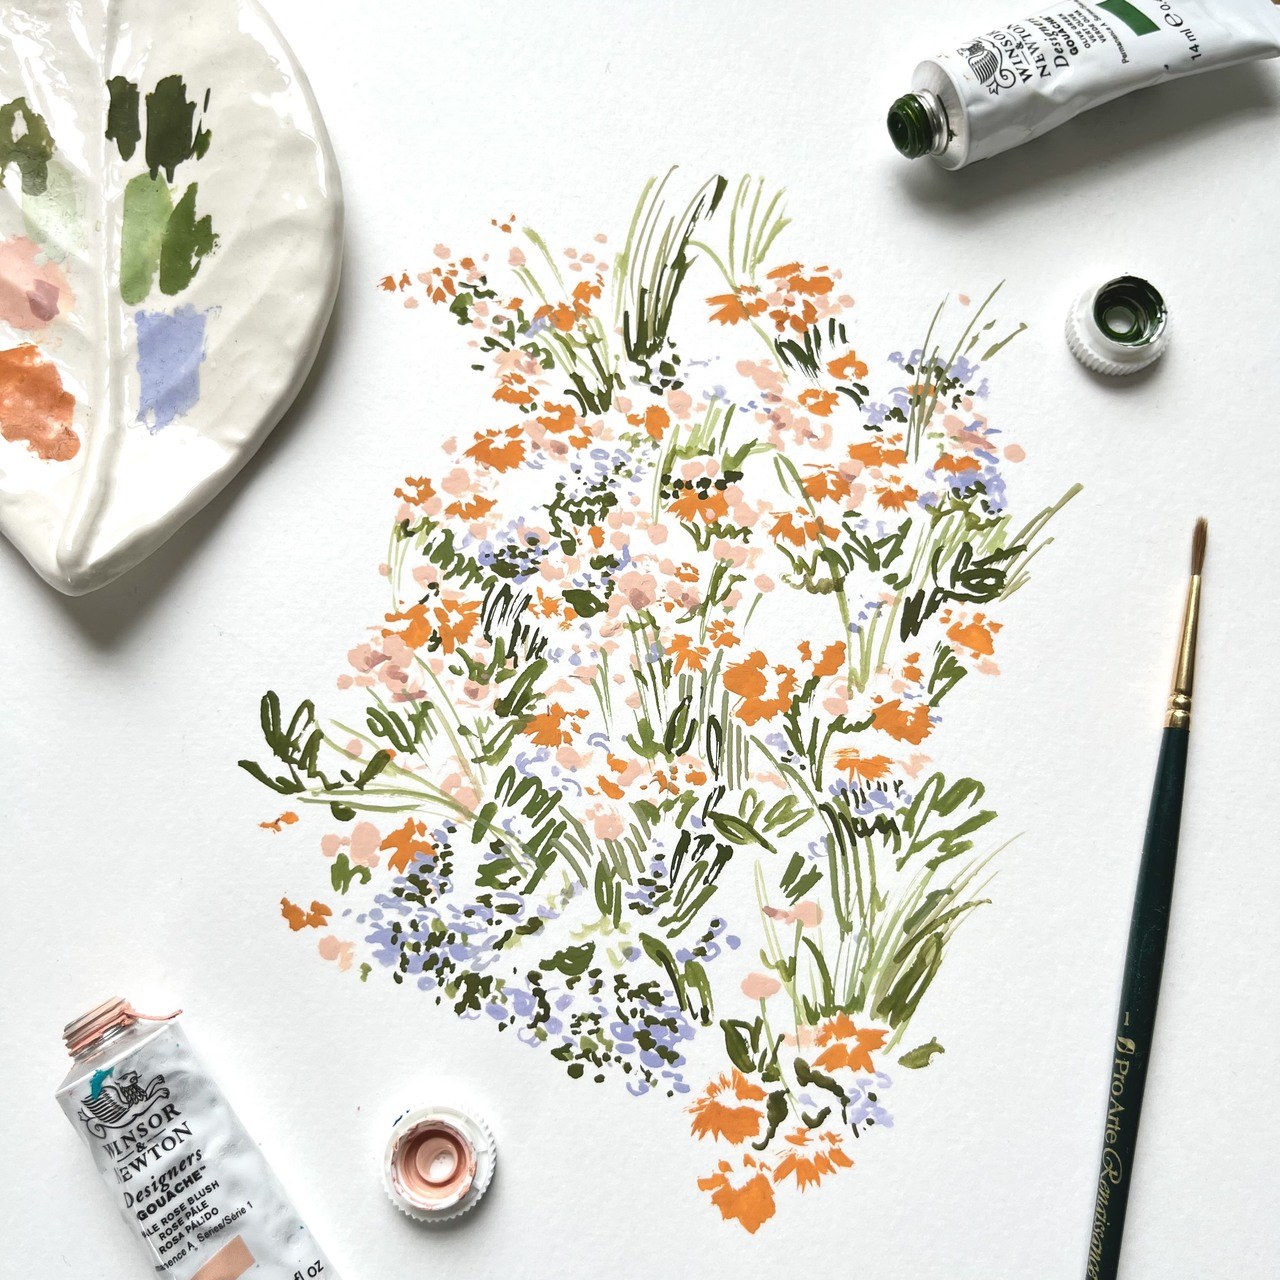 Watercolor painting to be turned into Summer Wallpaper | Rose Jocham x Hygge & West